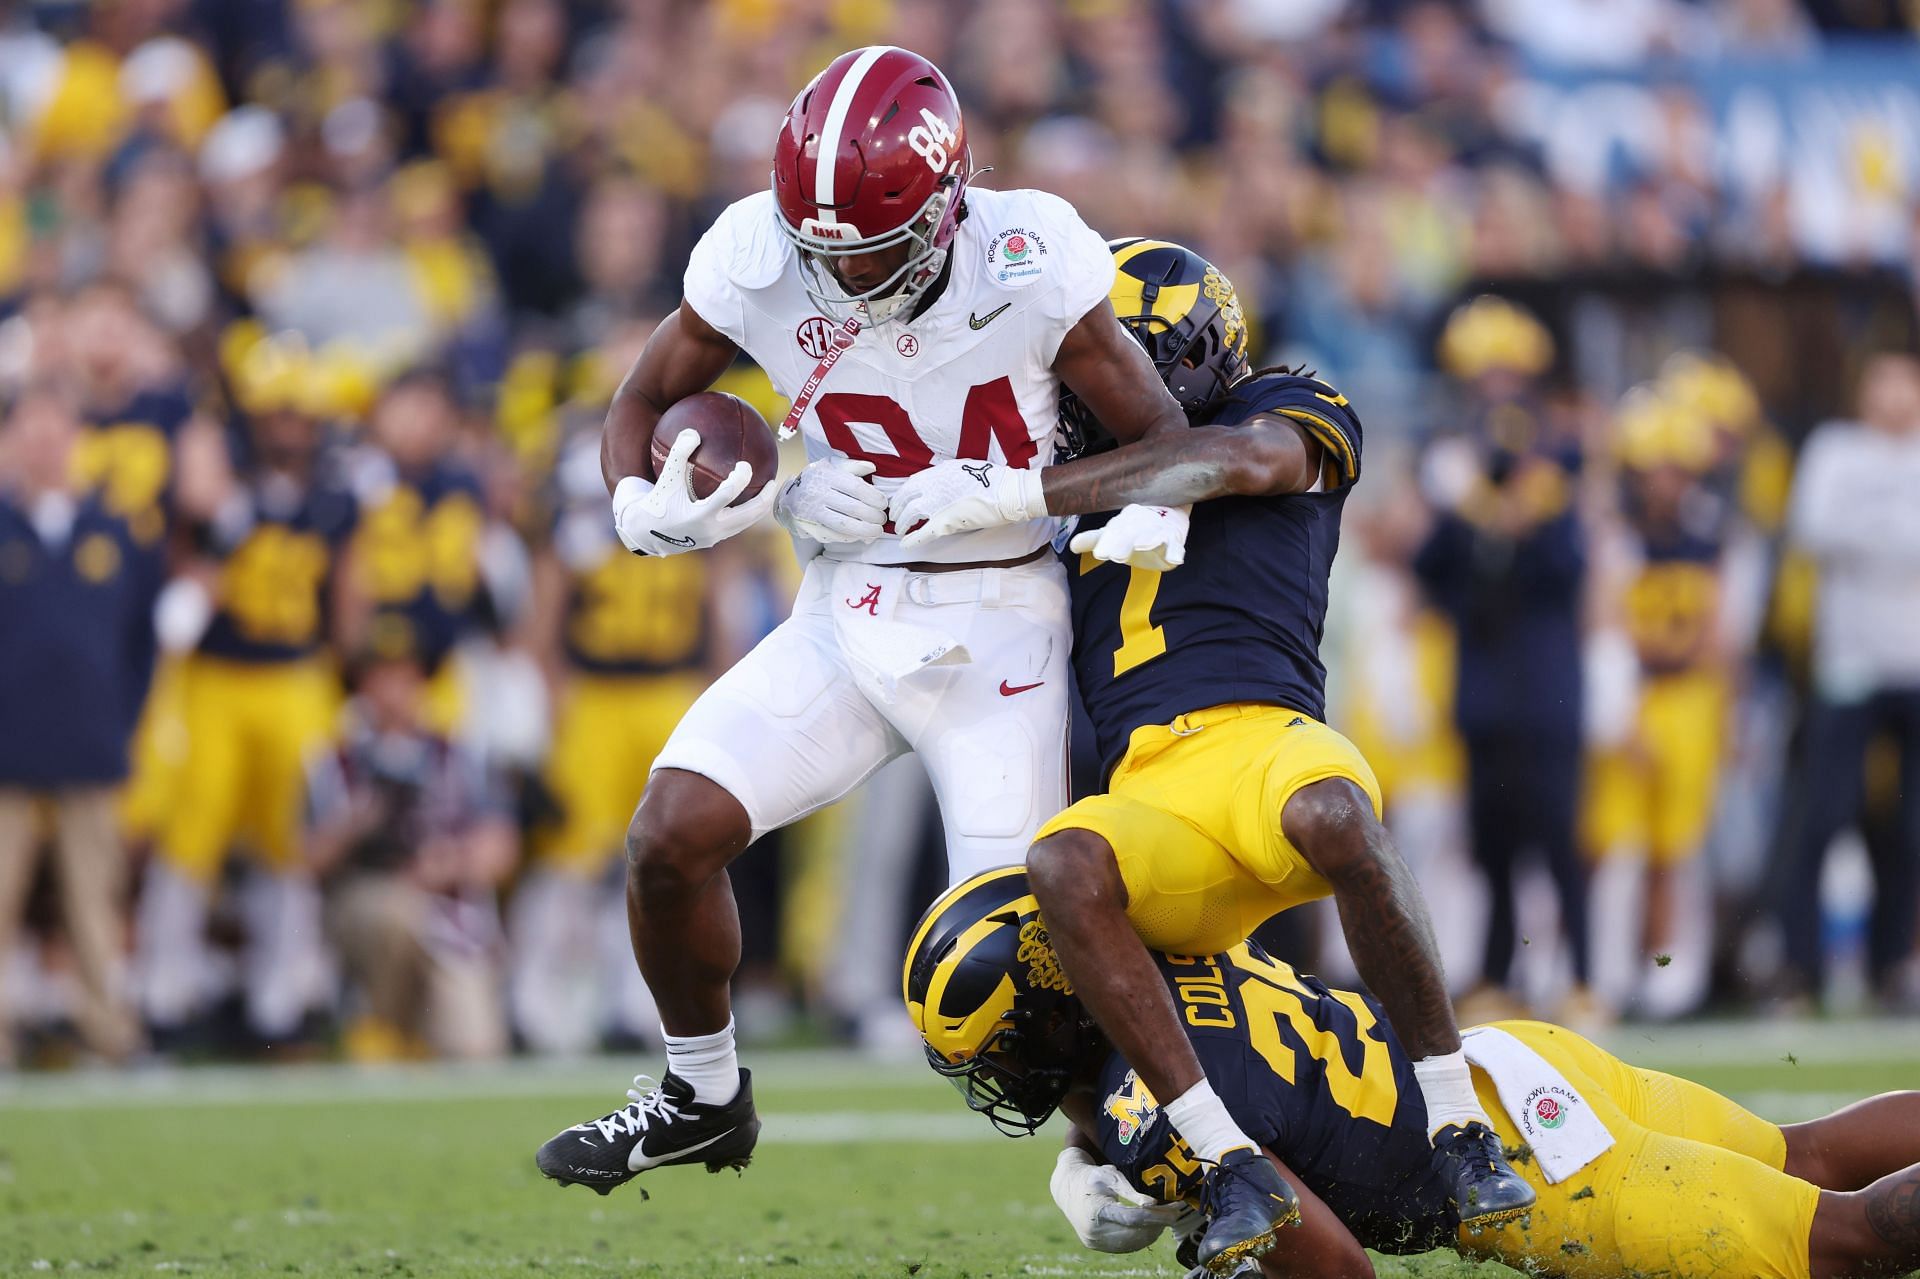 Amari Niblack #84 of the Alabama Crimson Tide runs with the ball while being tackled by Junior Colson #25 and Makari Paige #7 of the Michigan Wolverines